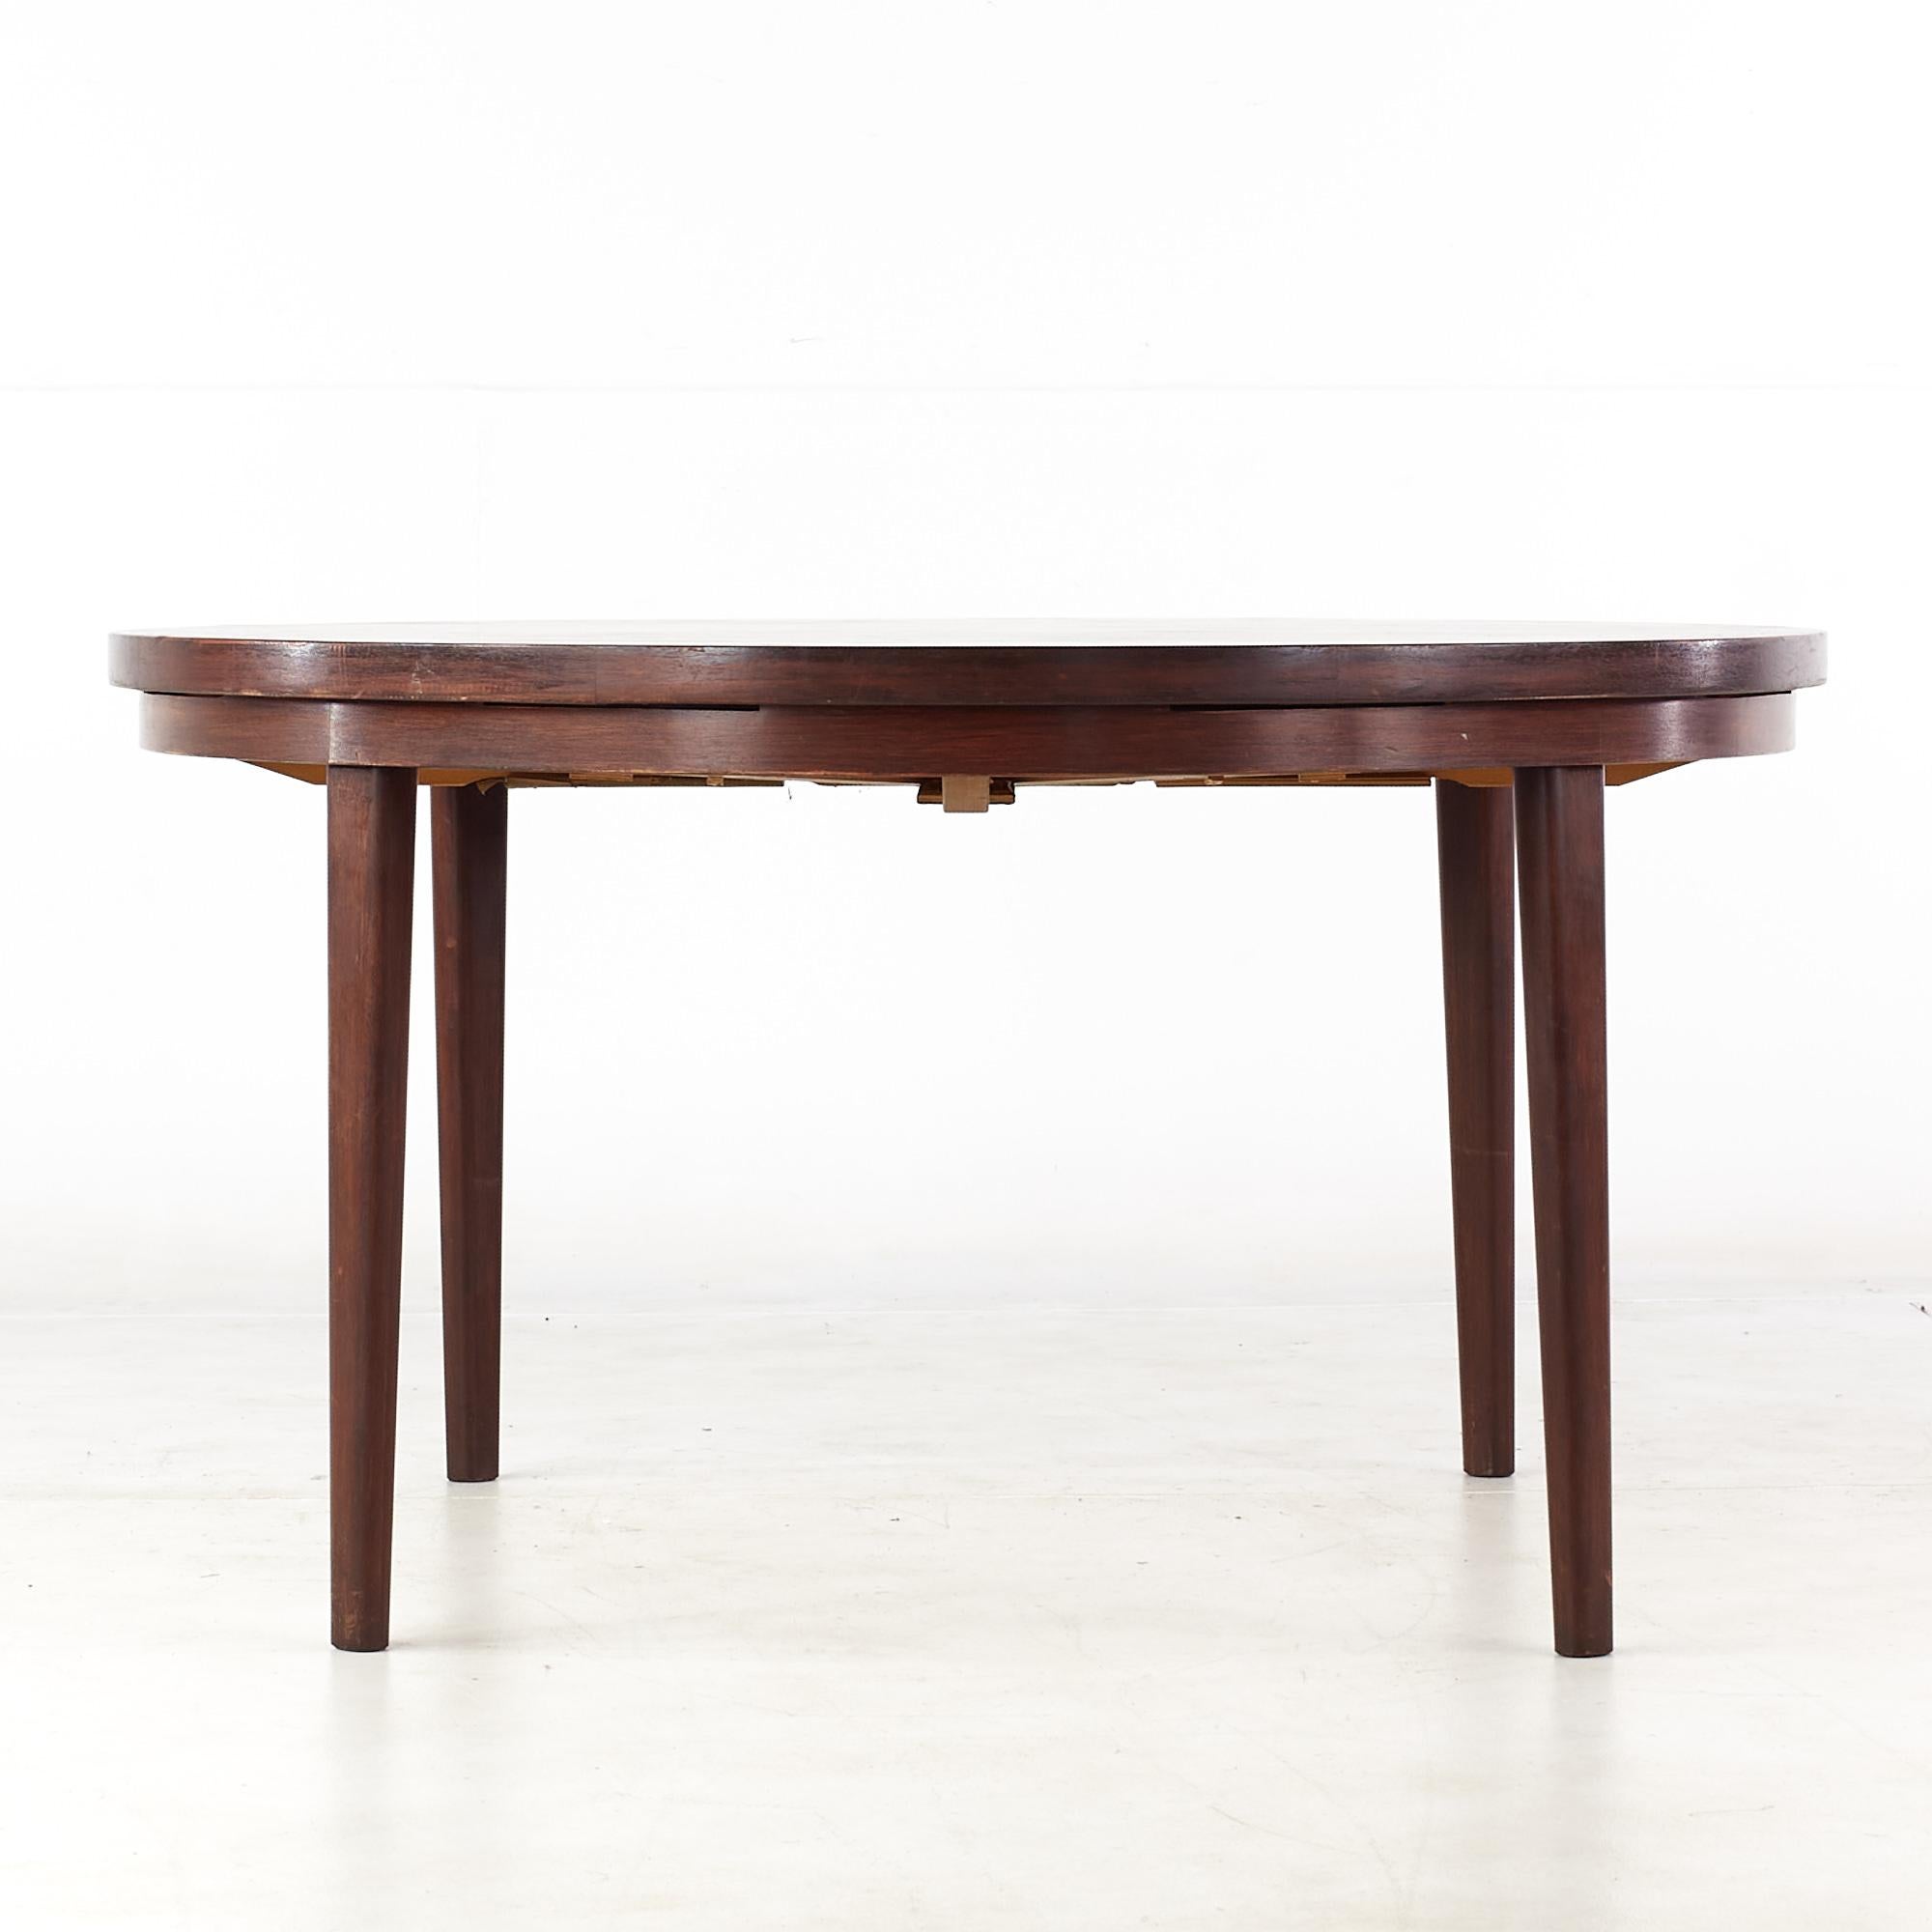 Dyrlund Mid century rosewood lotus round expanding dining table.

This table measures: 51.5 wide x 51.5 deep x 28 high, with a chair clearance of 24.25 inches.
The expanded measurements for this table are: 69 wide x 69 inches deep.

All pieces